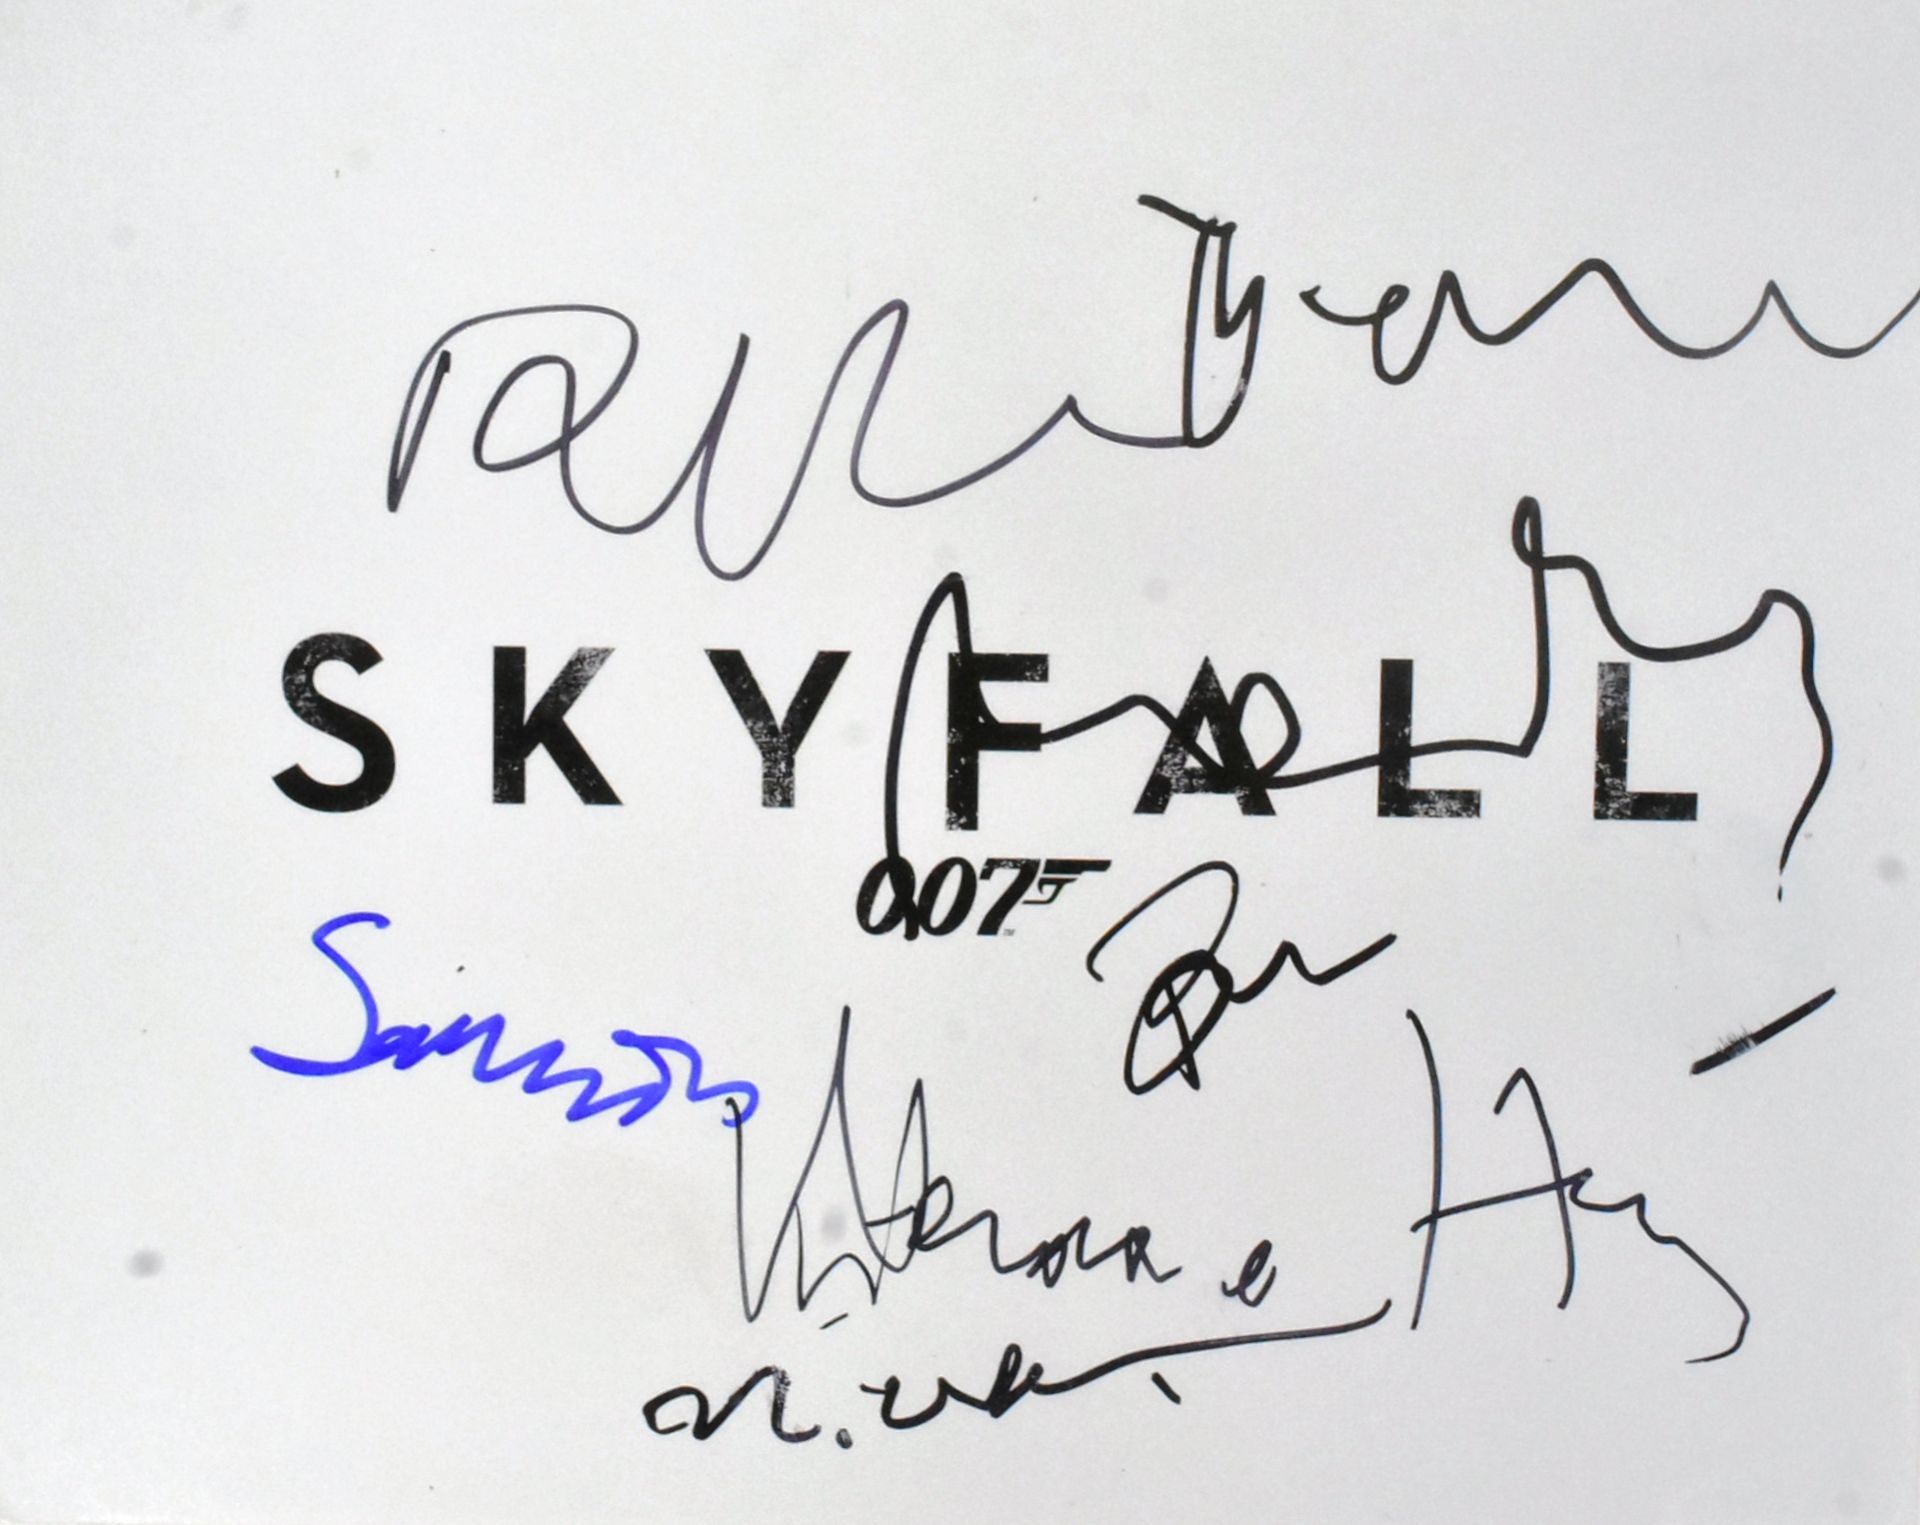 SKYFALL (2012) - JAMES BOND 007 - CAST SIGNED 8X10" FROM PREMIERE